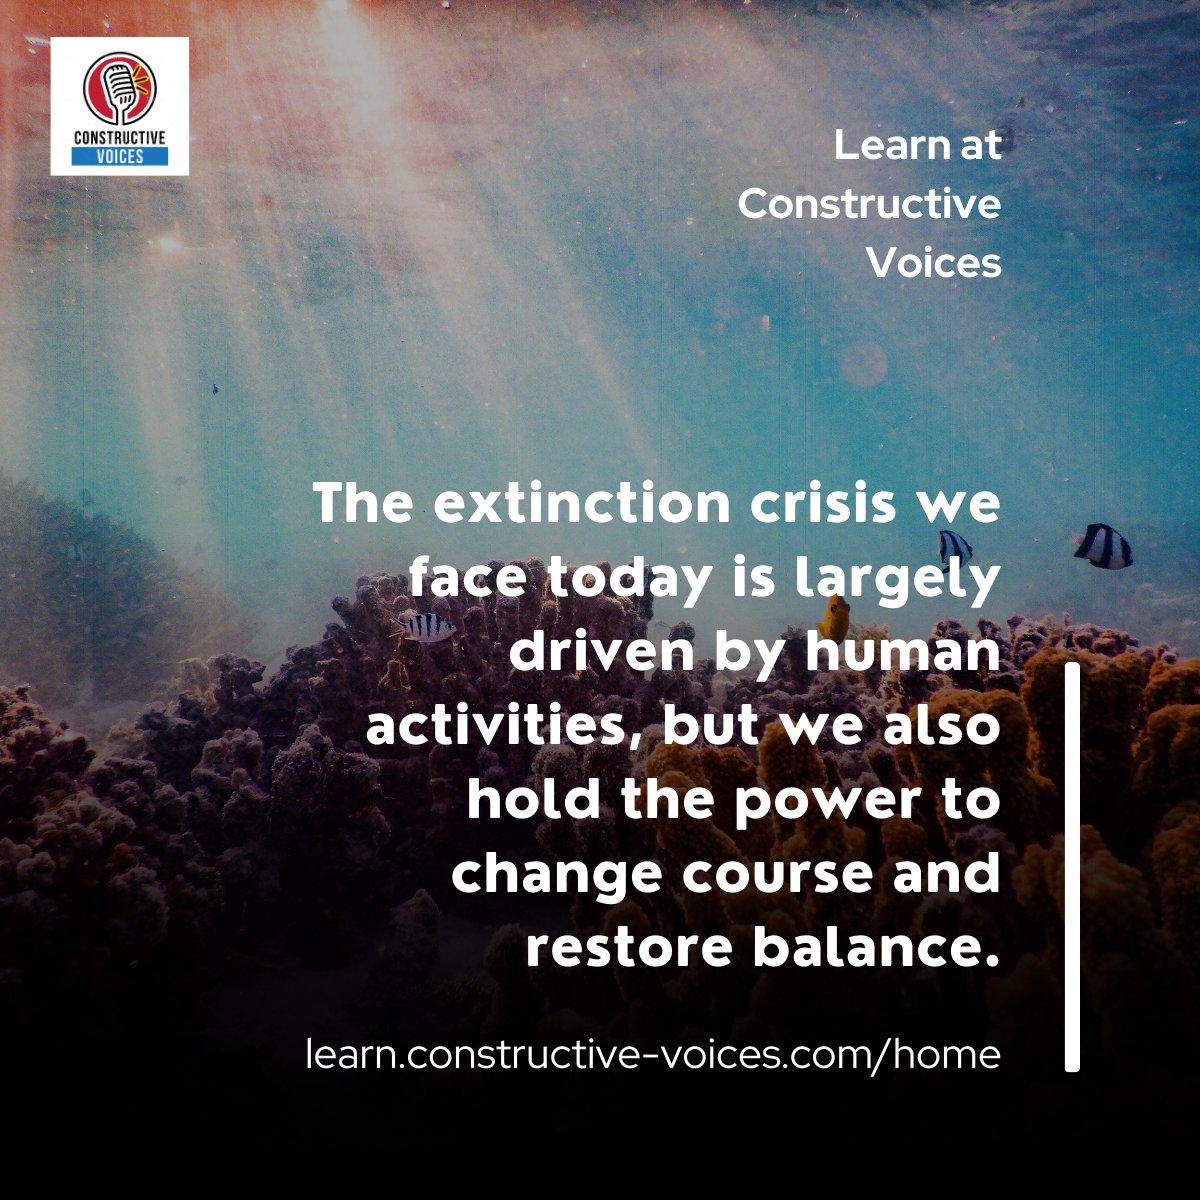 'The extinction crisis we face today is largely driven by human activities, but we also hold the power to change course and restore balance.' #biodiversity #biodiversitynetgain #training - learn.constructive-voices.com/home/